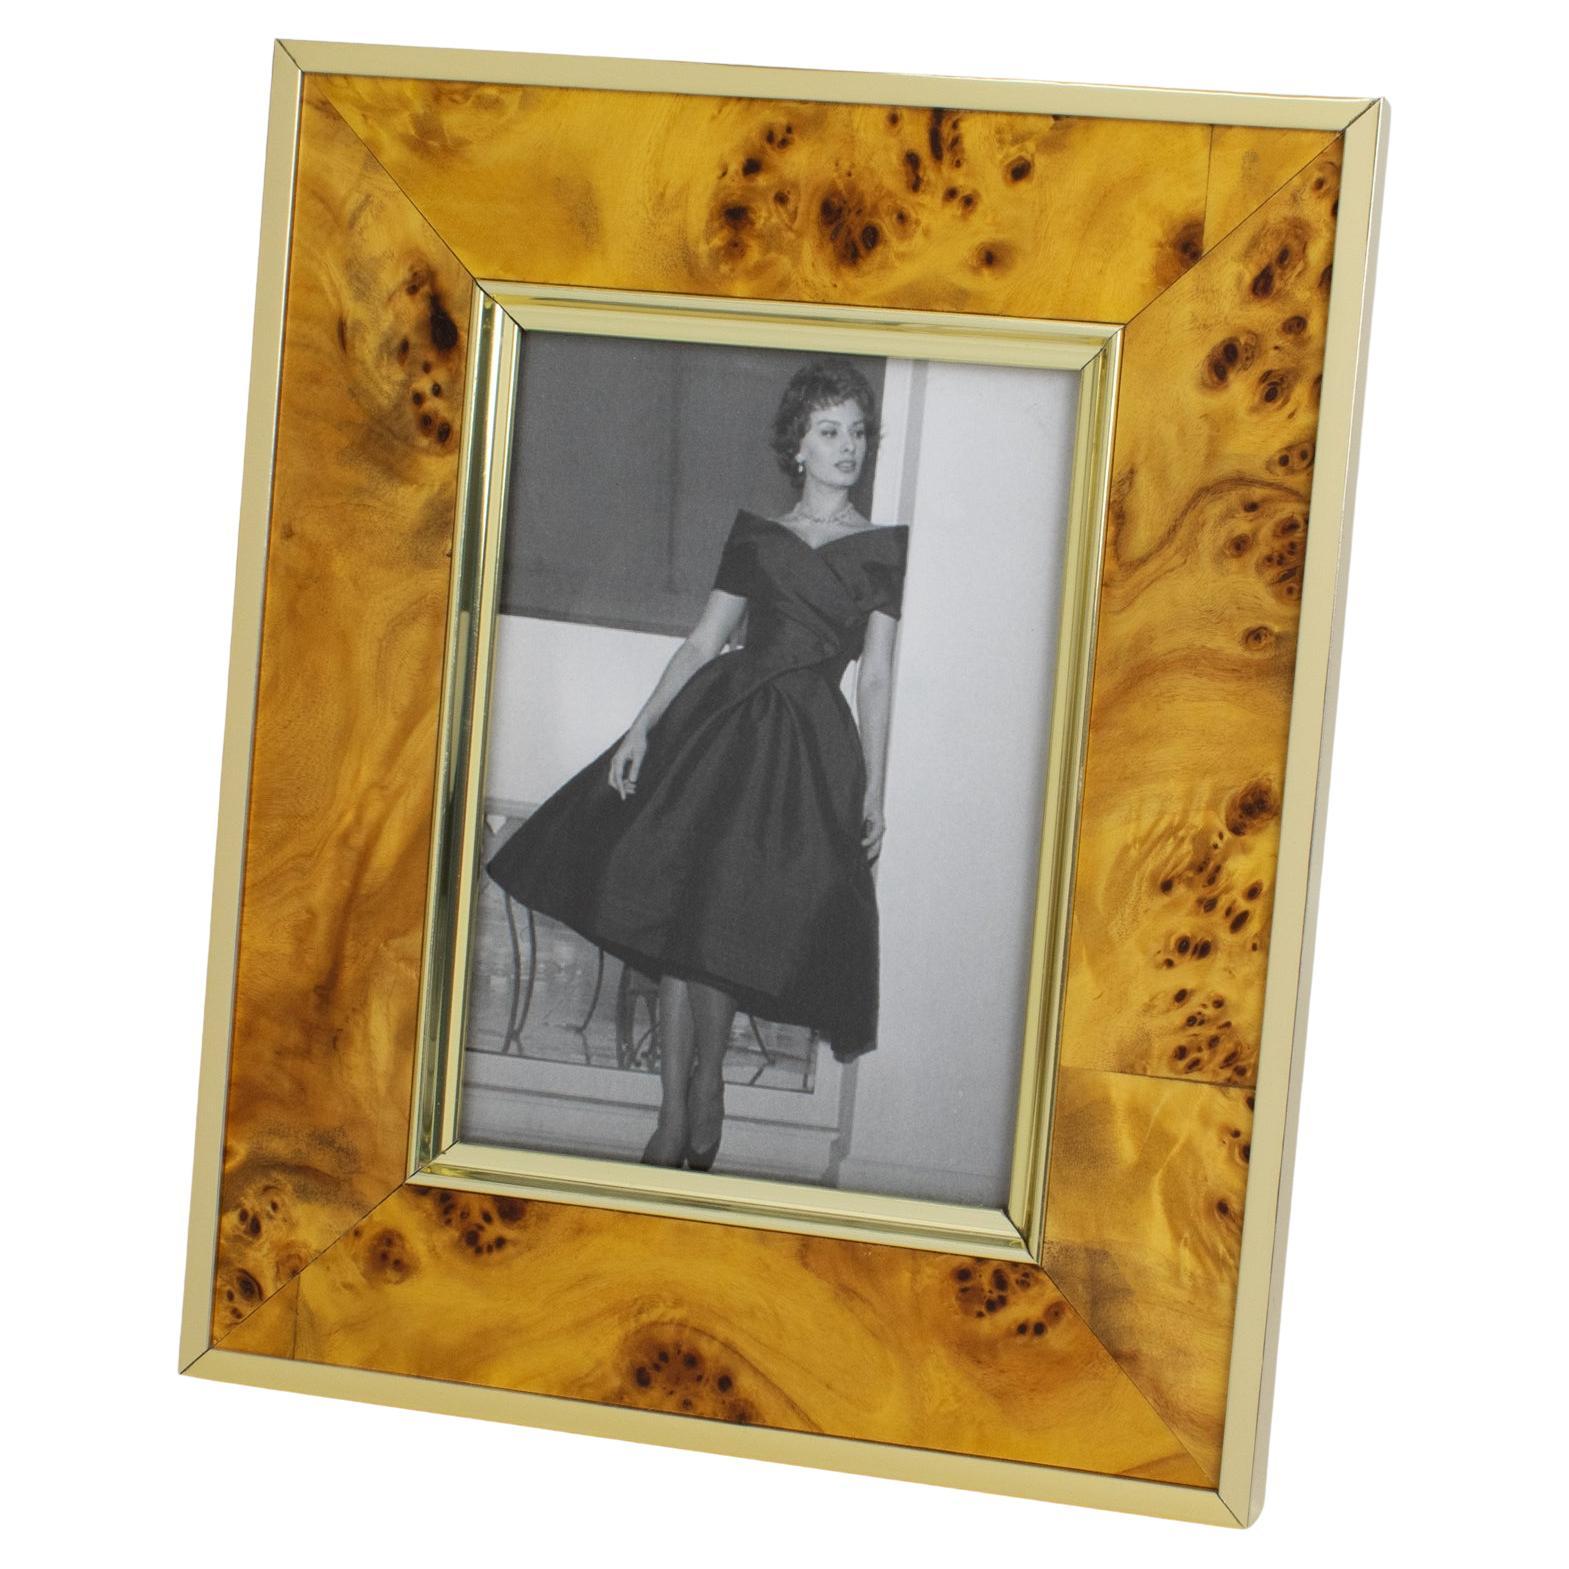 Montagnani Italy Walnut Wood and Metal Picture Frame, 1970s For Sale